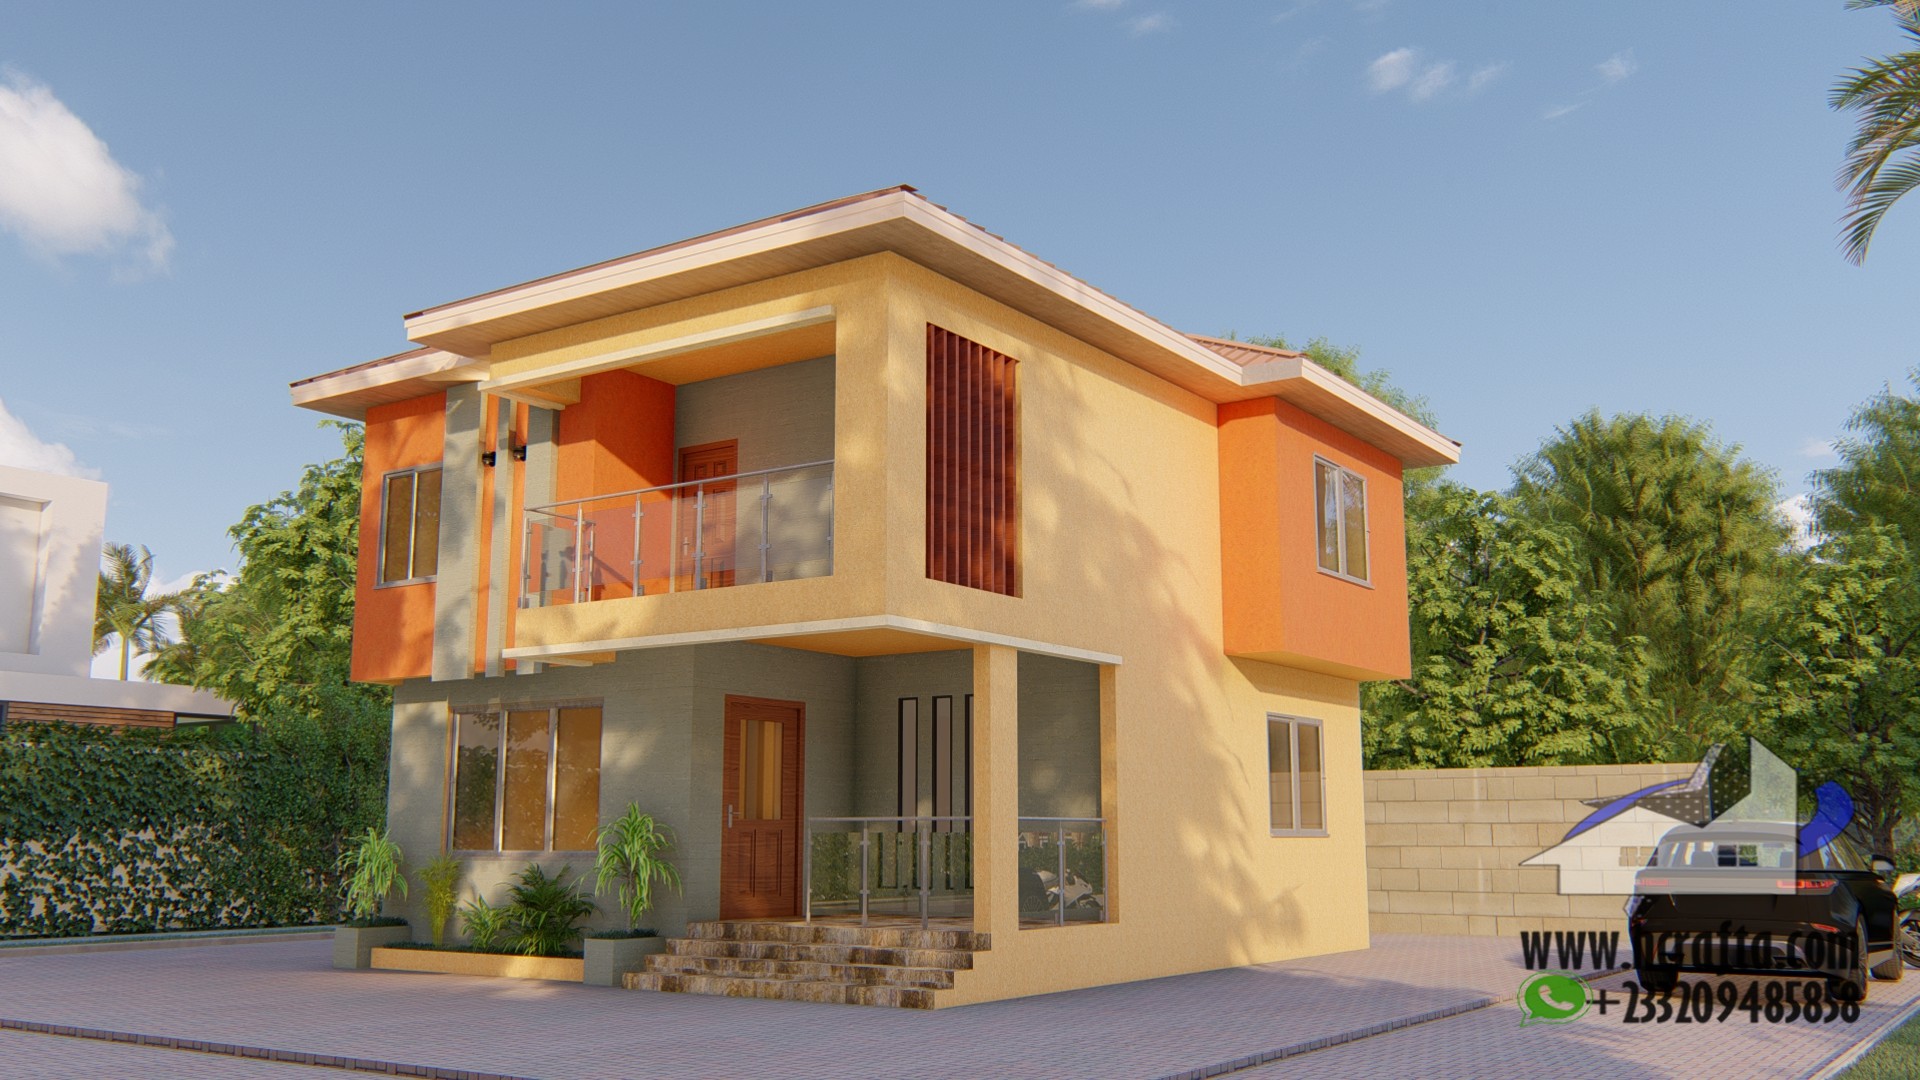 4 Bedroom Duplex: Ideal Home for Comfort and Luxury